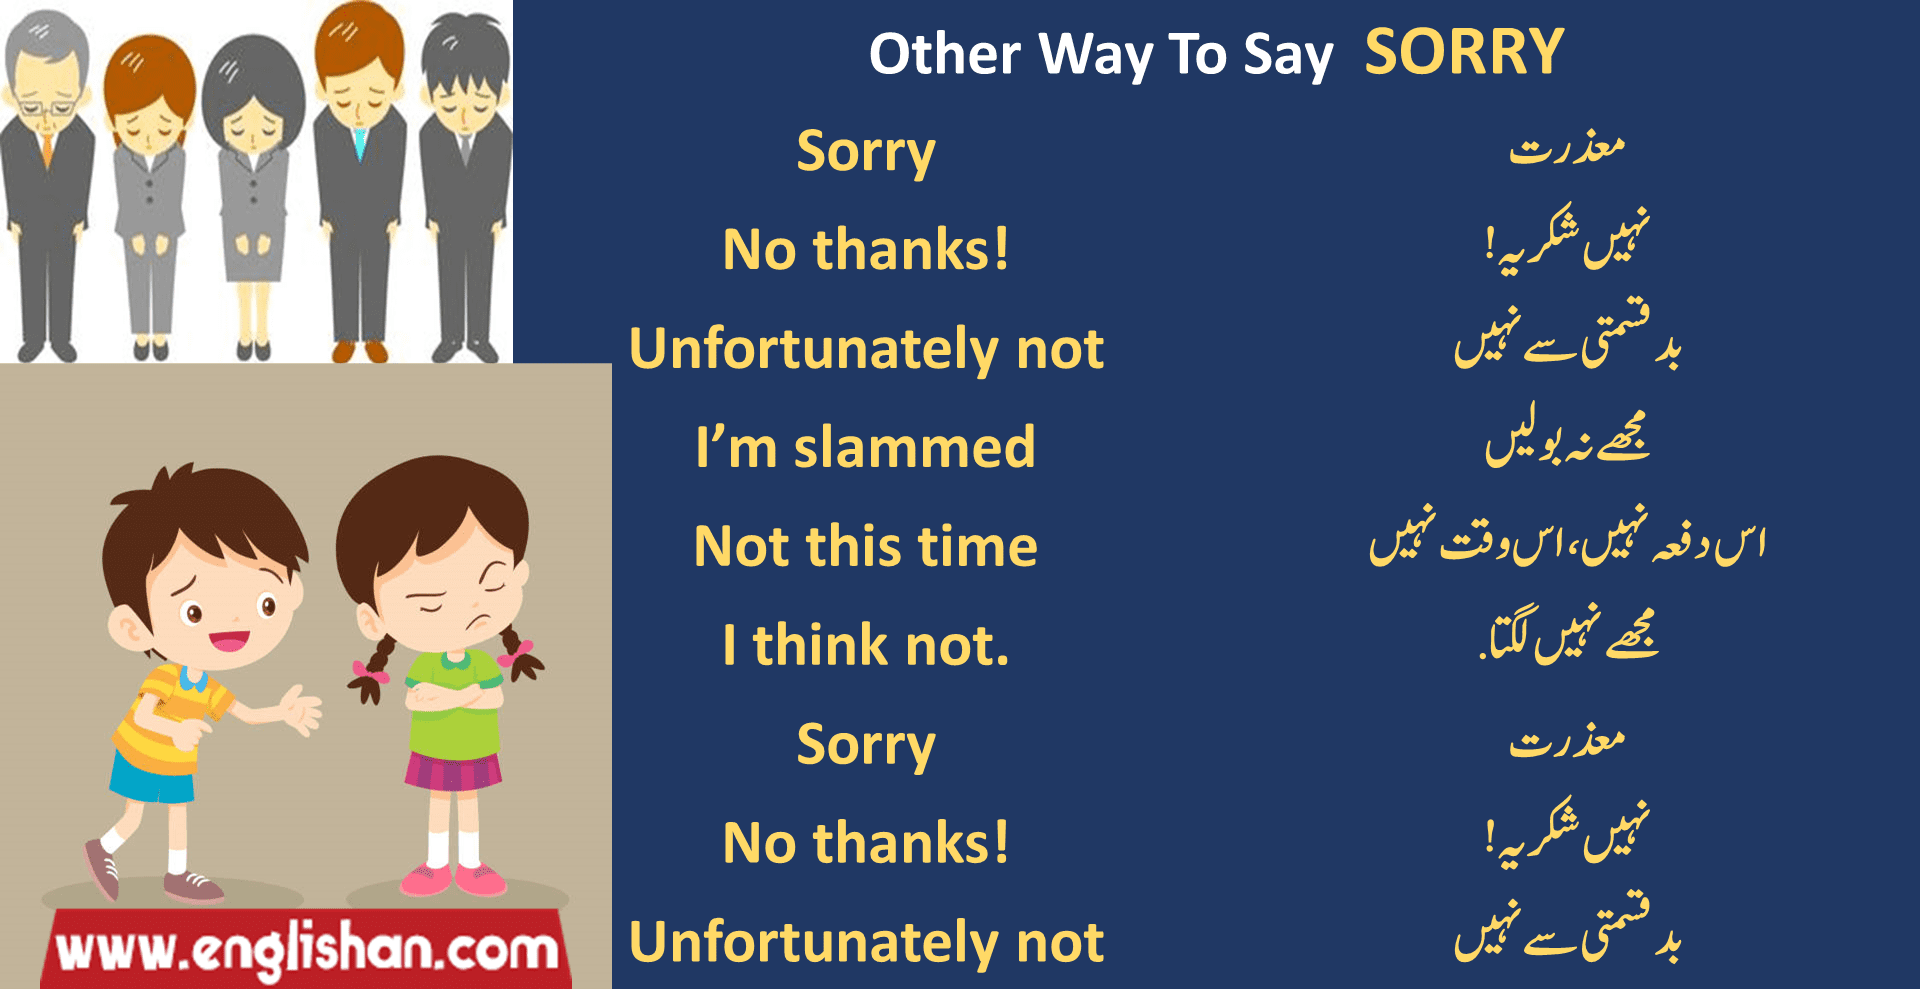 Other ways to say sorry. Please repeat that!. Can you repeat that please. I m not understanding